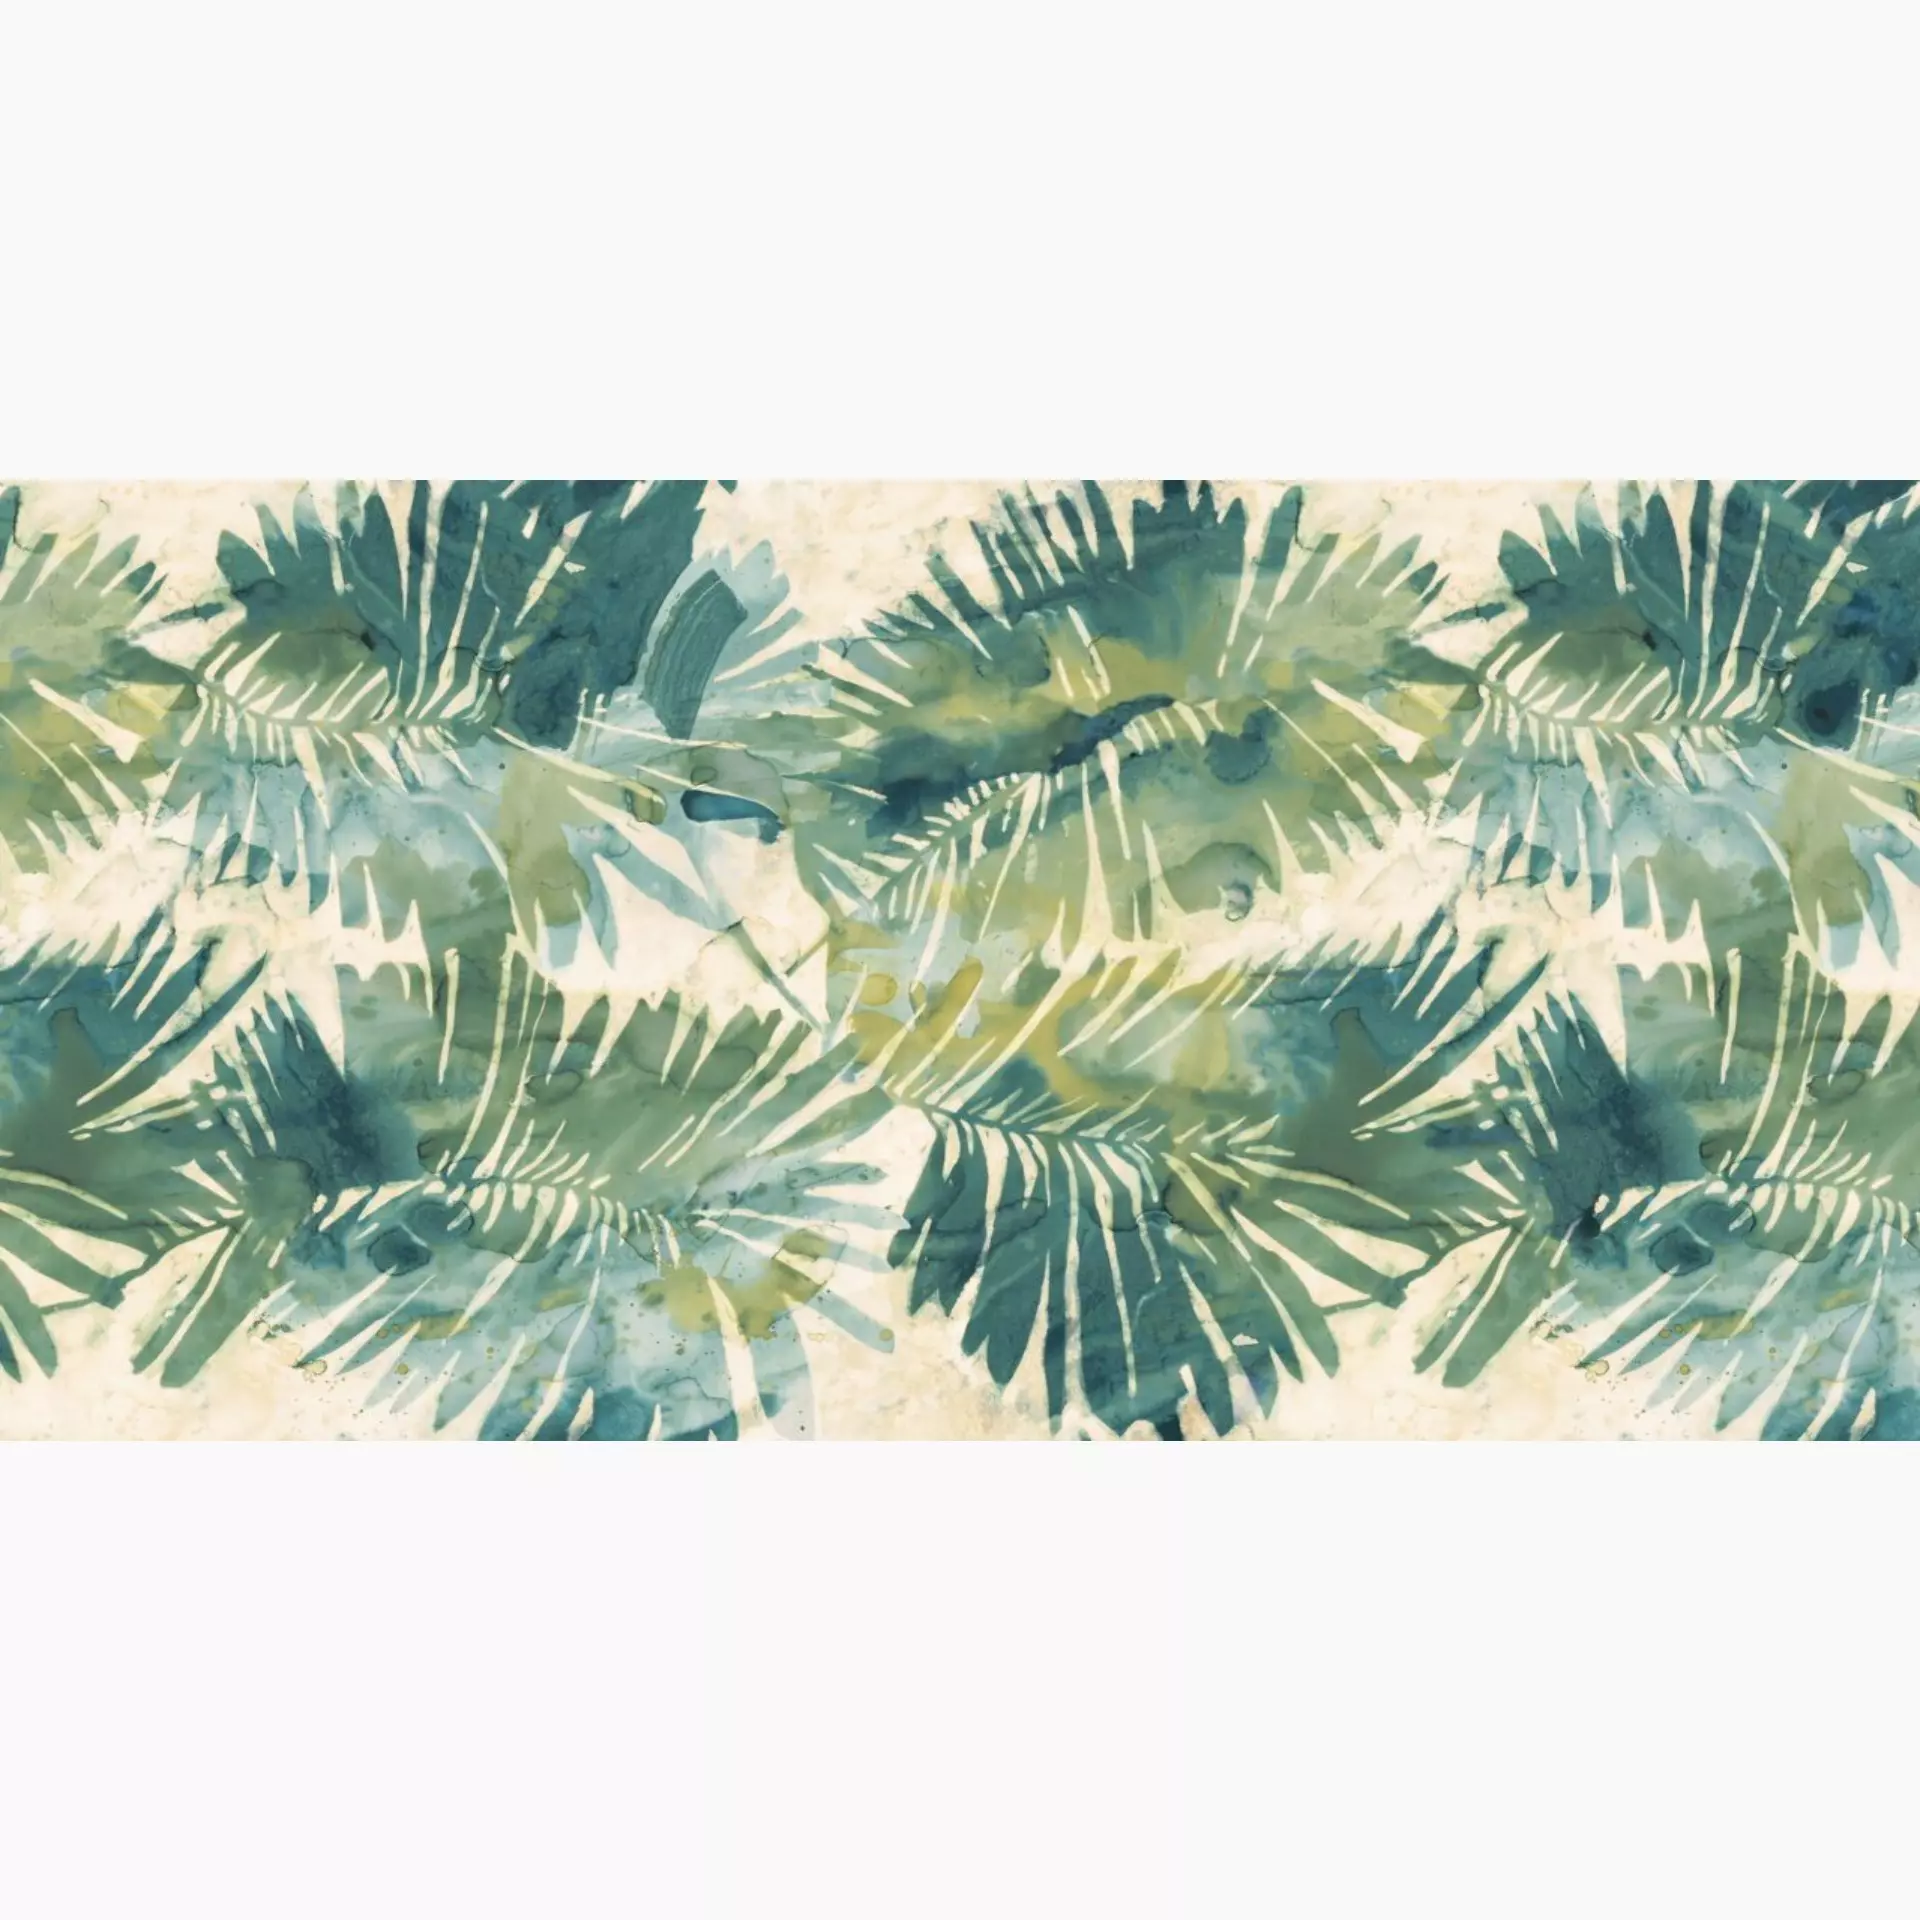 ABK Wide & Style Tropical Digit + Decor Tropical PF60007268 160x320cm rectified 6mm